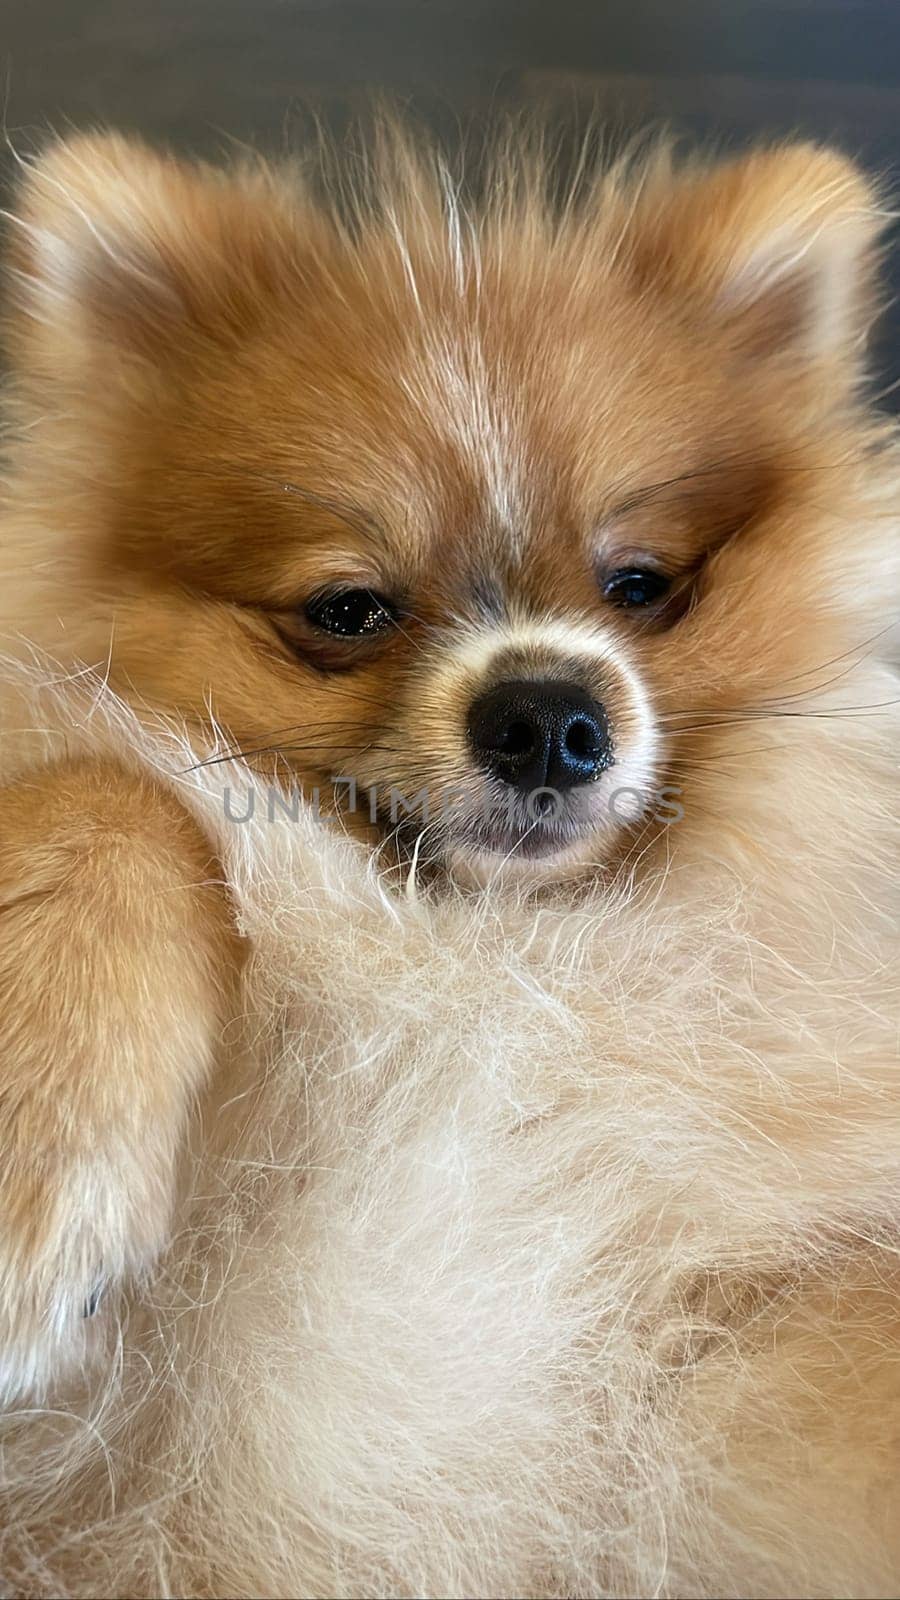 Pomeranian Spitz dog cute lovely pose smiling fluffy Pomerania spitz with rounded face, very happy good for background content by antoksena